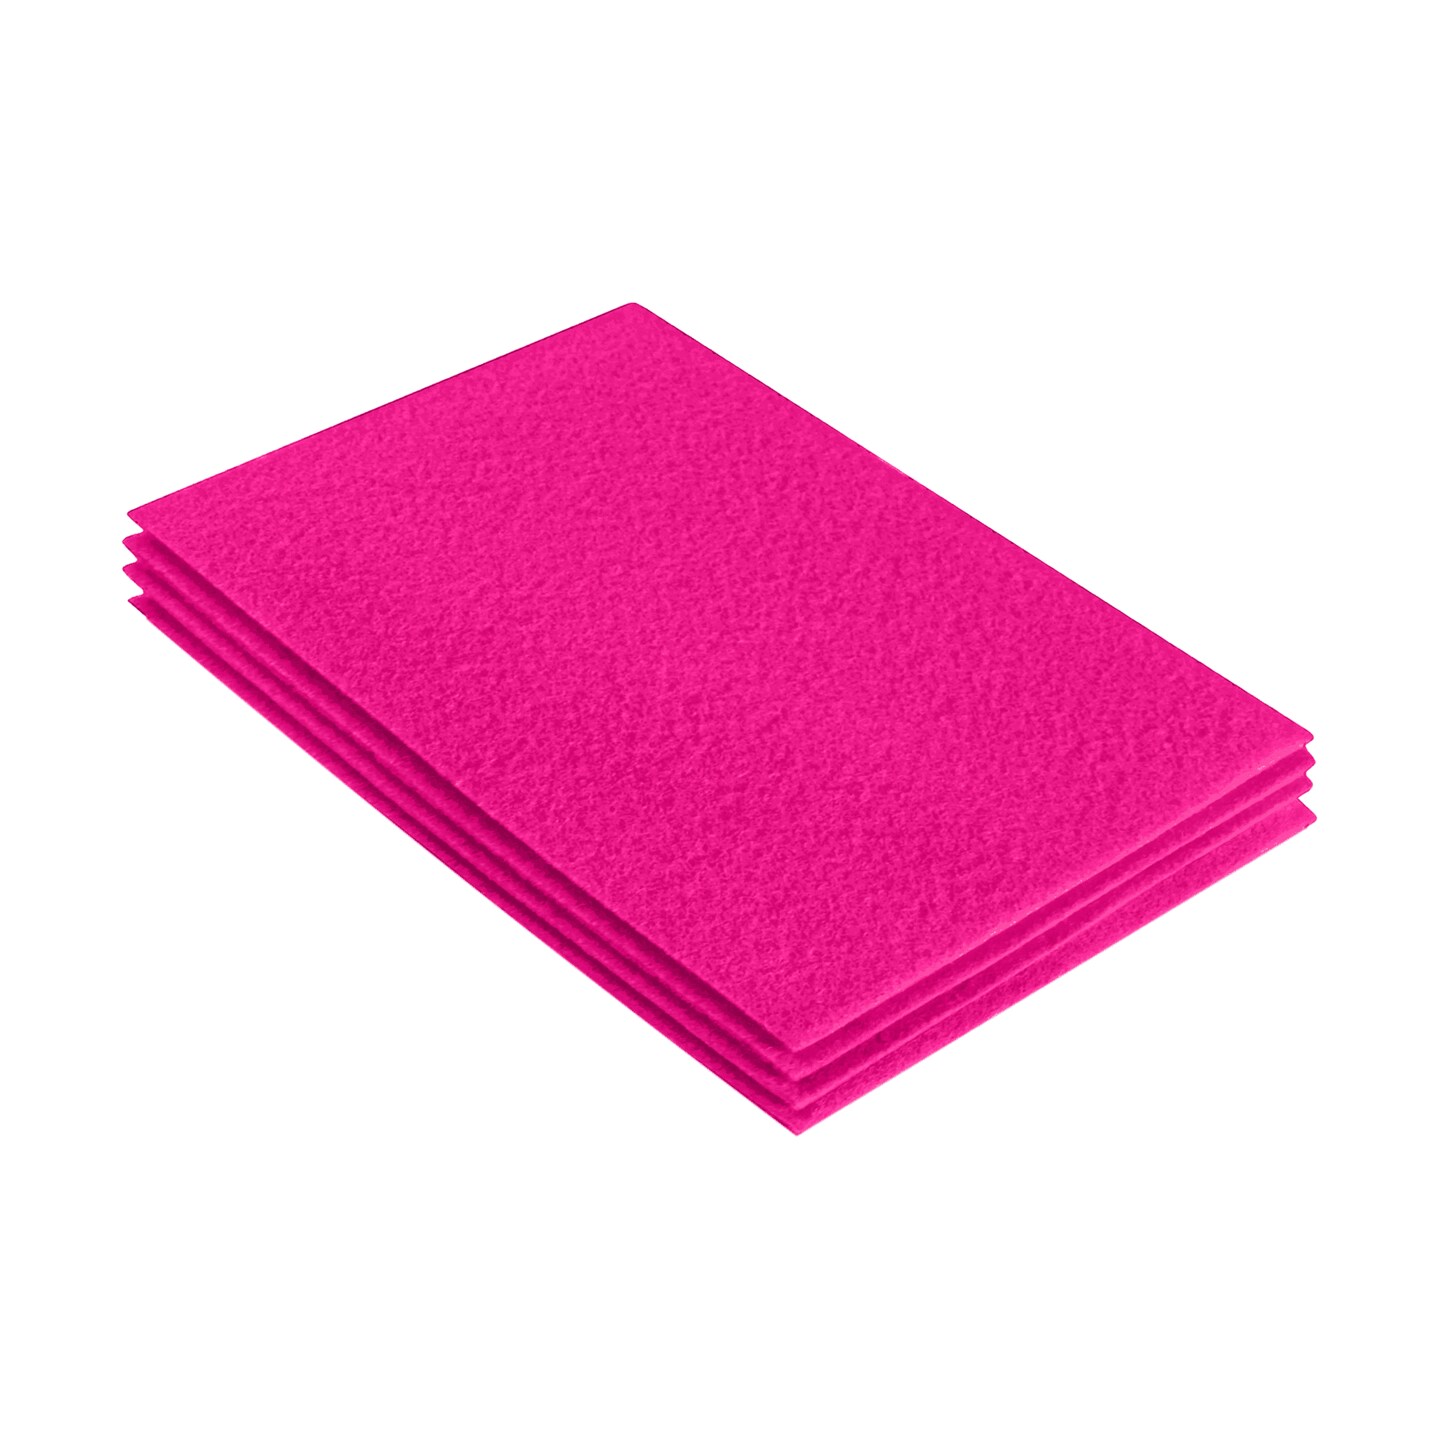 FabricLA Acrylic Felt Sheets for Crafts - Precut 9 X 12 Inches (20 cm X  30 cm) Felt Squares - Use Felt Fabric Craft Sheets for DIY, Hobby, Costume,  and Decoration, Neon Pink